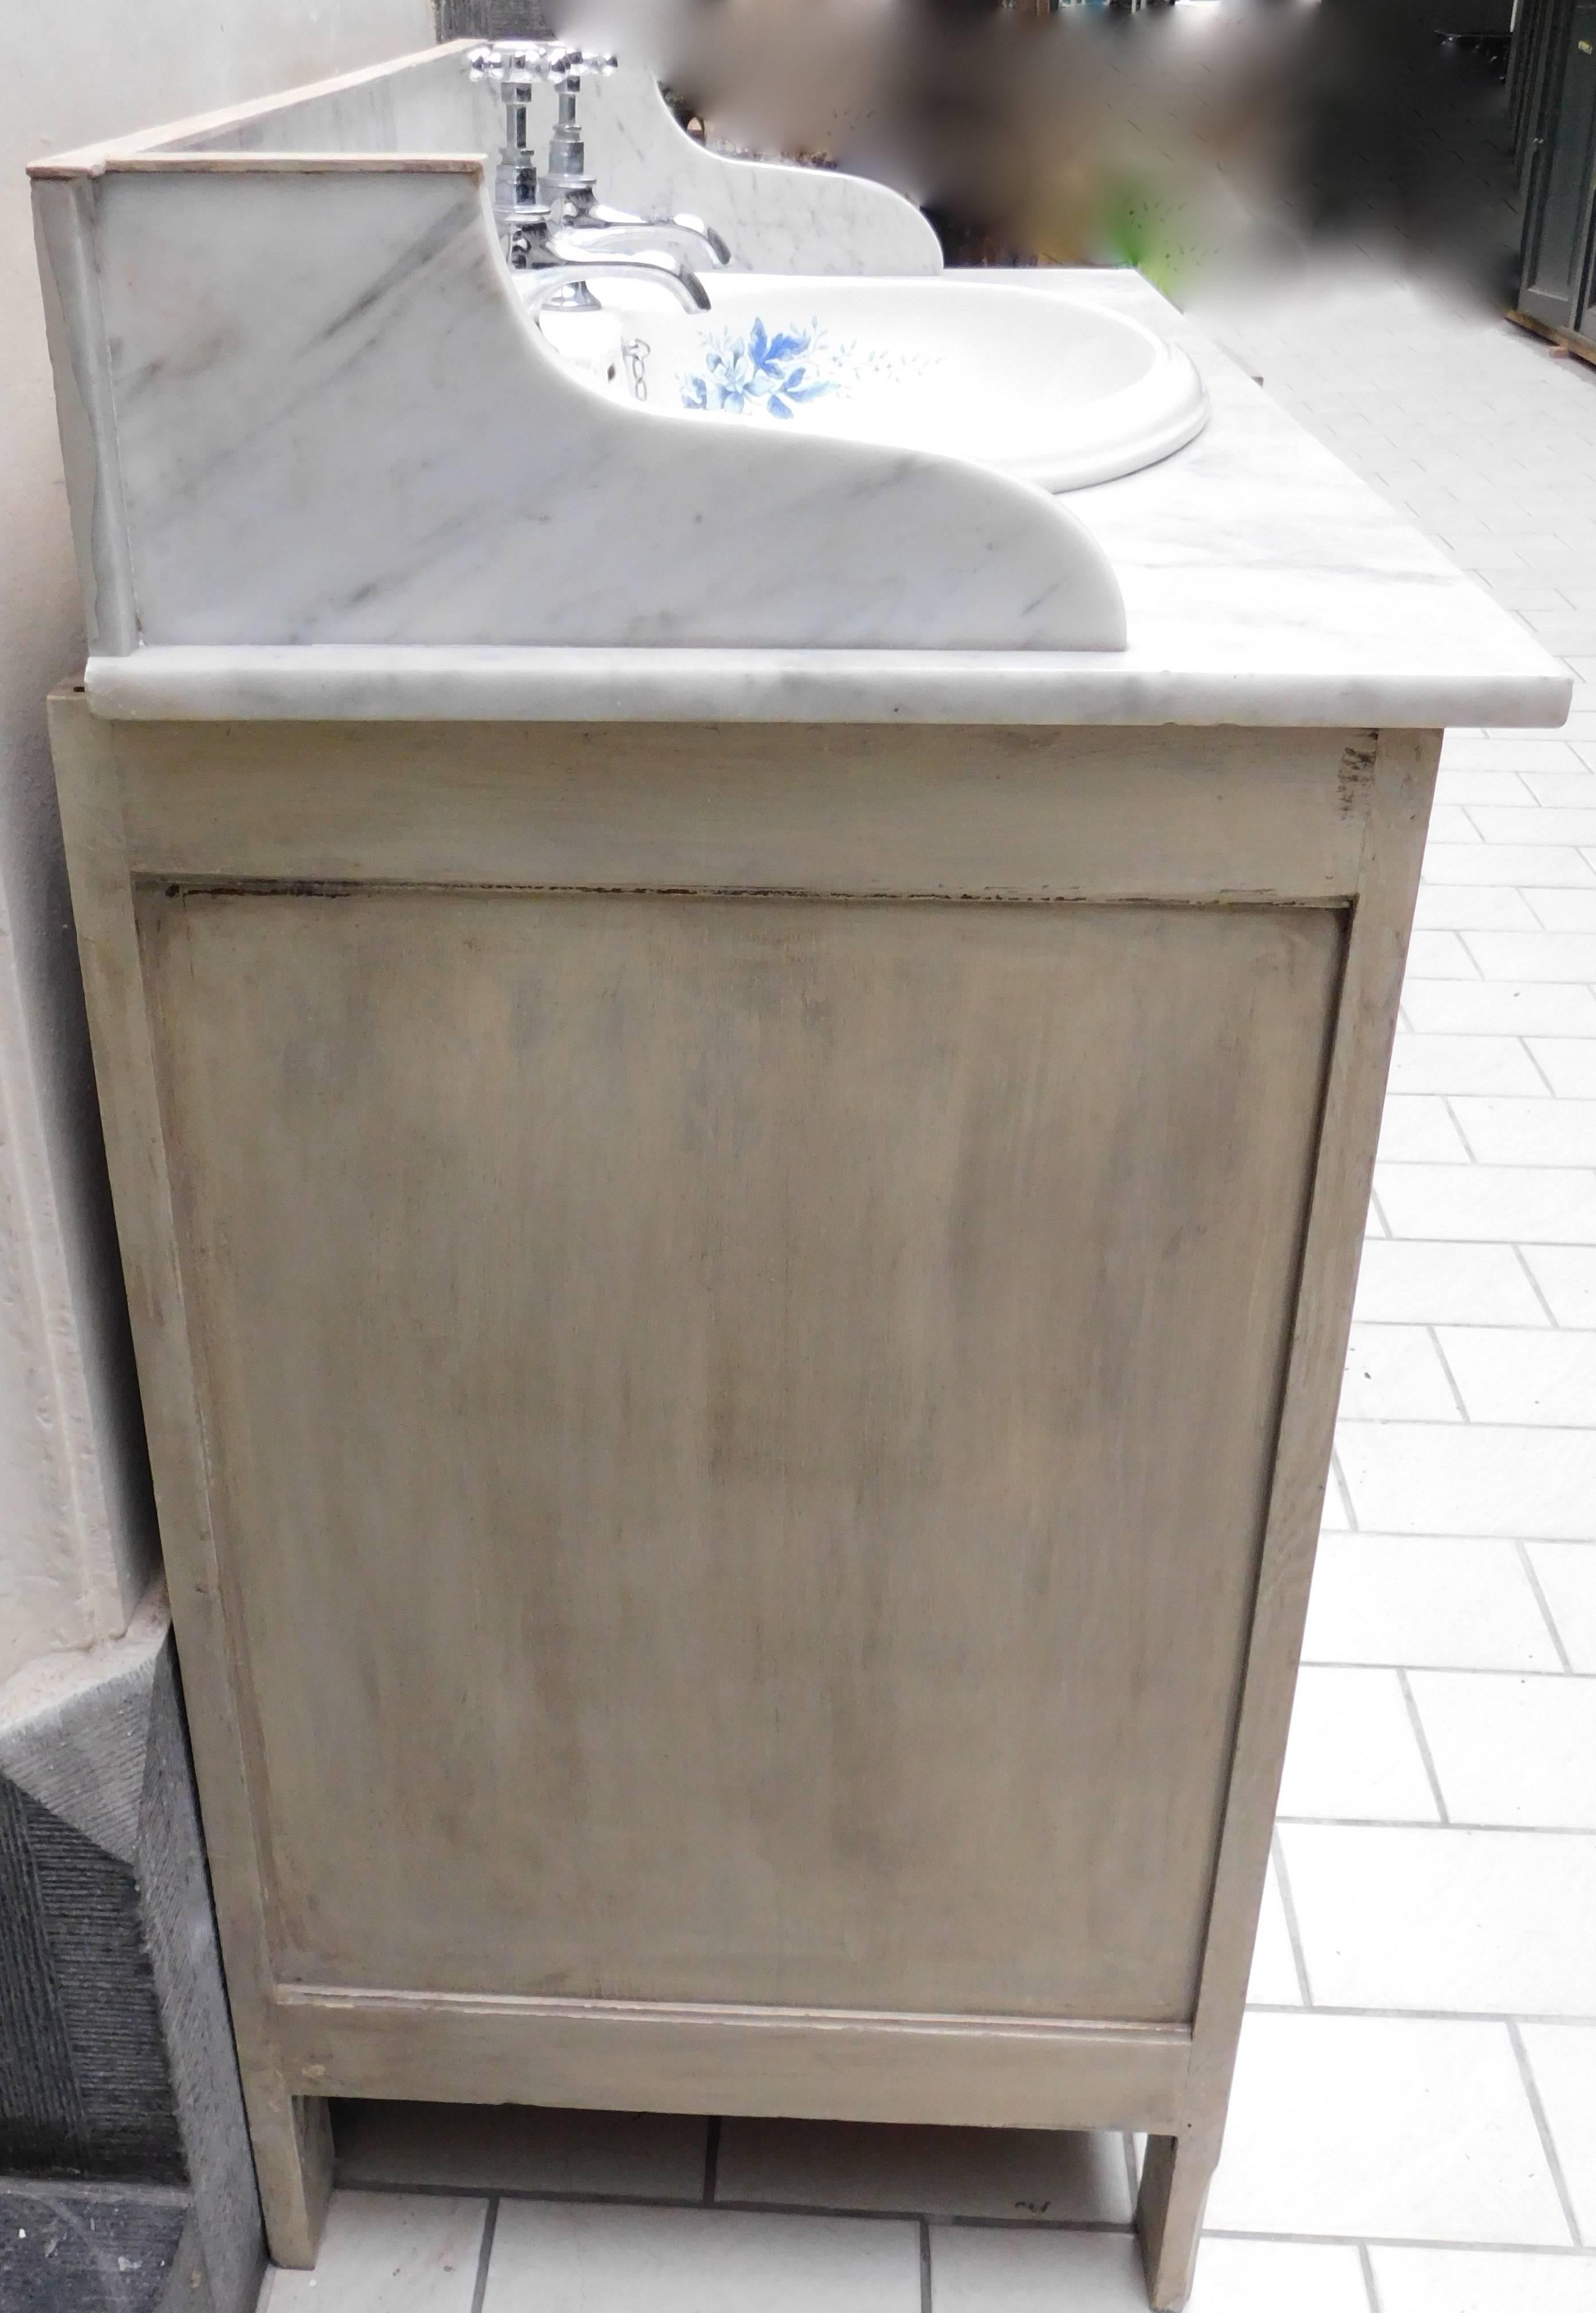 Circa 1910 English marble top oak sink vanity cabinet and mirror with patina painted finish.
Lovely victorian style blue and white porcelain sink with chrome faucets and stopper is set into the carrera marble top.
The bevelled glass mirror is shown